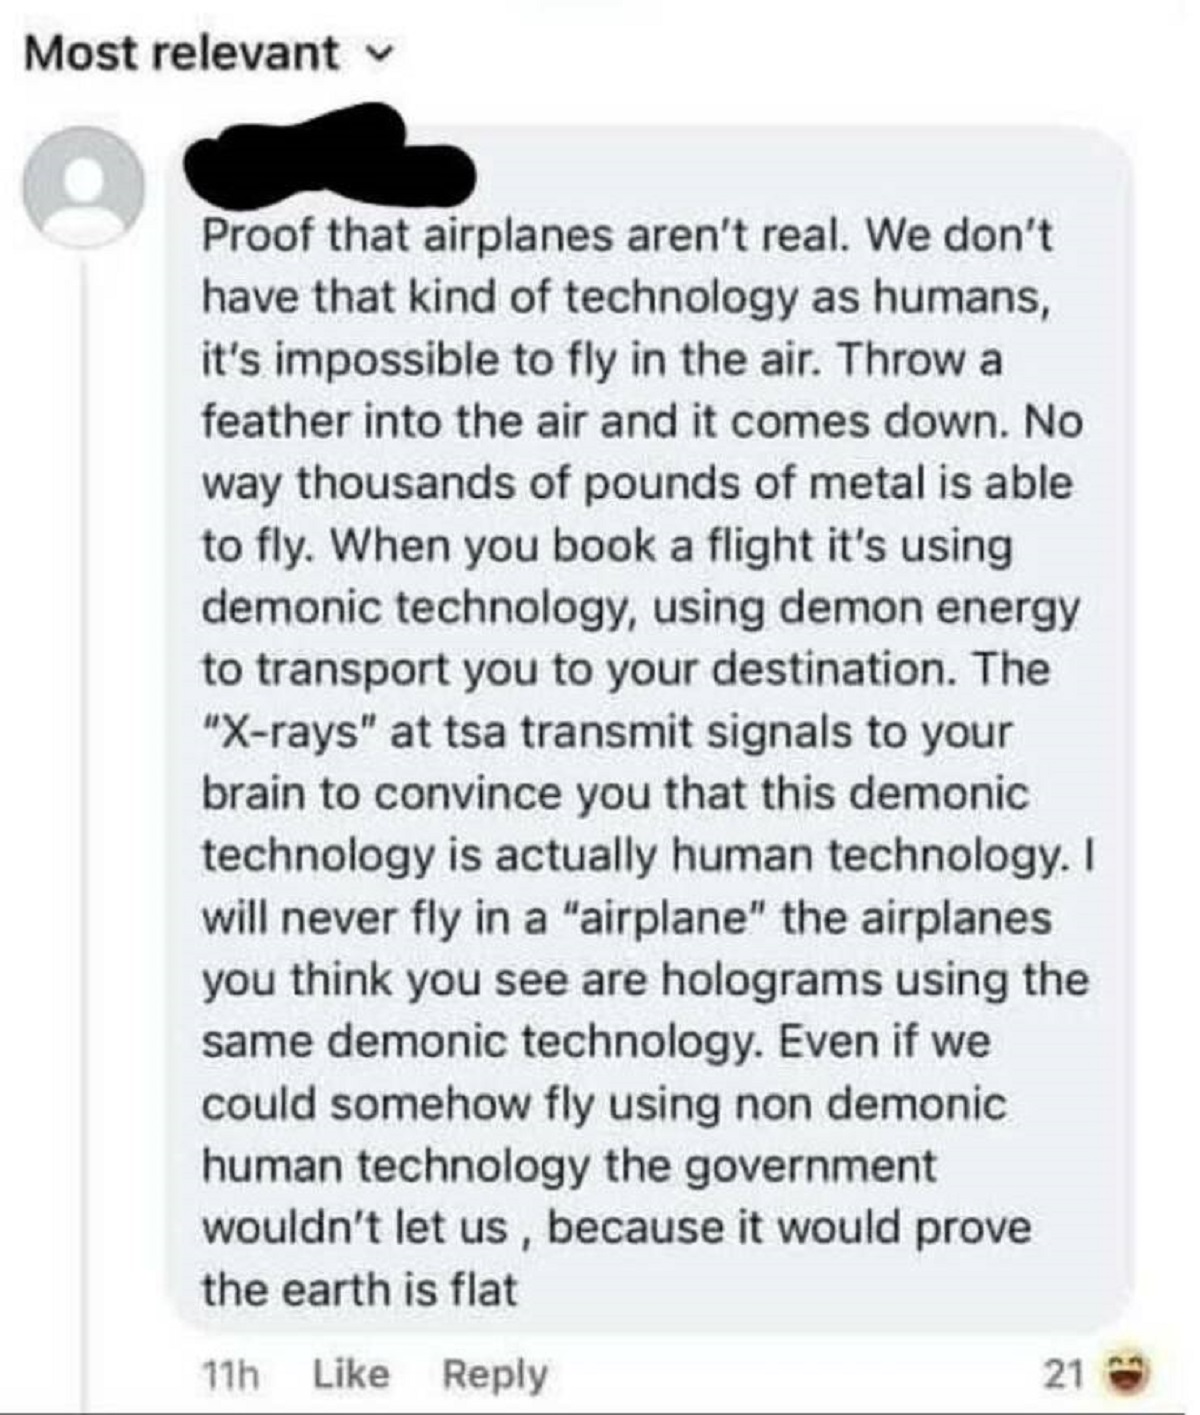 screenshot - Most relevant Proof that airplanes aren't real. We don't have that kind of technology as humans, it's impossible to fly in the air. Throw a feather into the air and it comes down. No way thousands of pounds of metal is able to fly. When you b